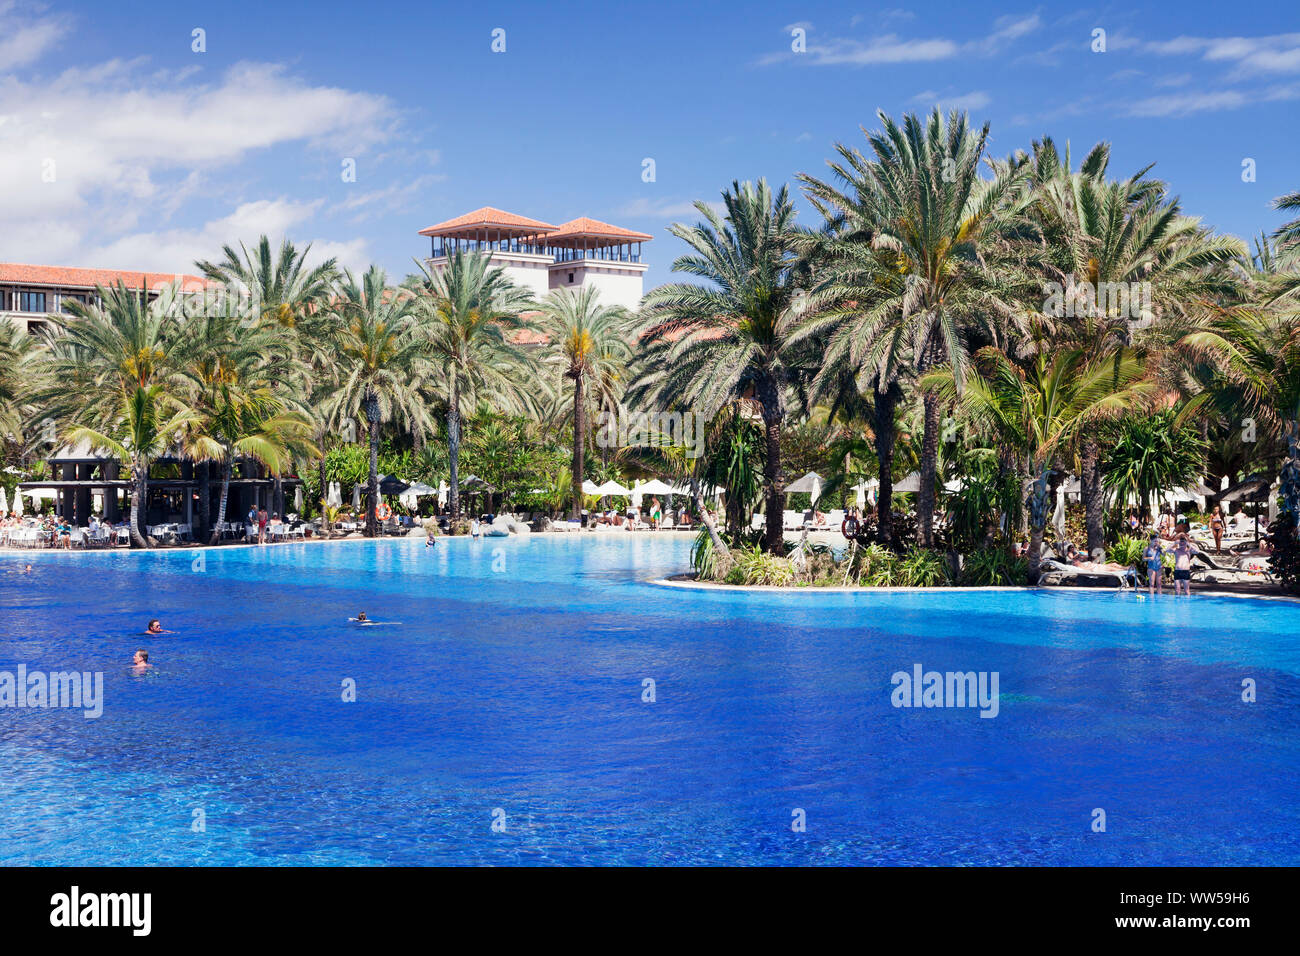 Pool of the Grand Hotel Costa, Meloneras, Gran Canaria, Canary Islands, Spain Stock Photo